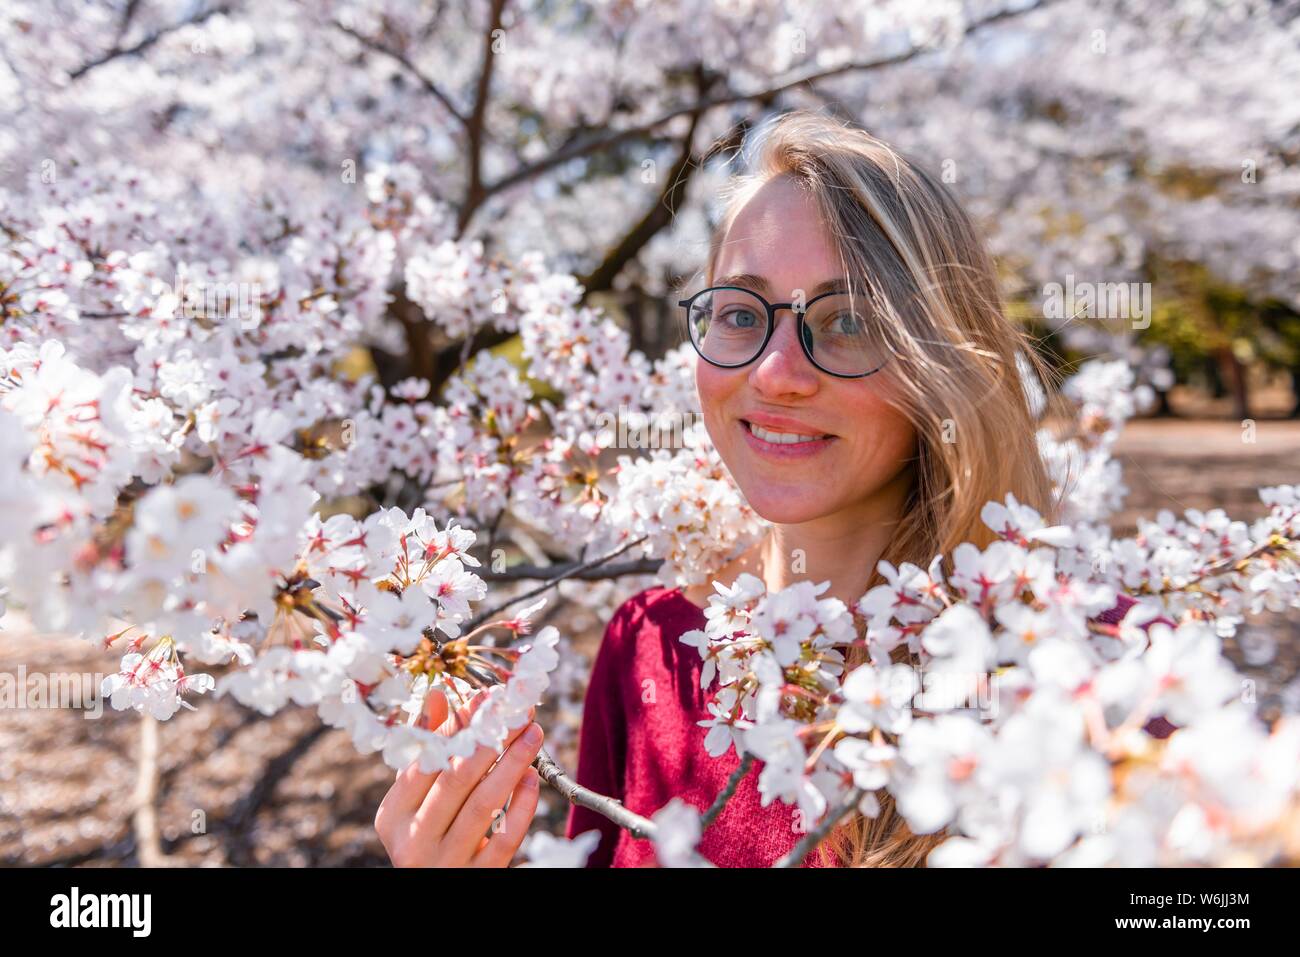 Portrait, Young woman between blooming cherry blossoms, Japanese cherry blossom in spring, Tokyo, Japan Stock Photo